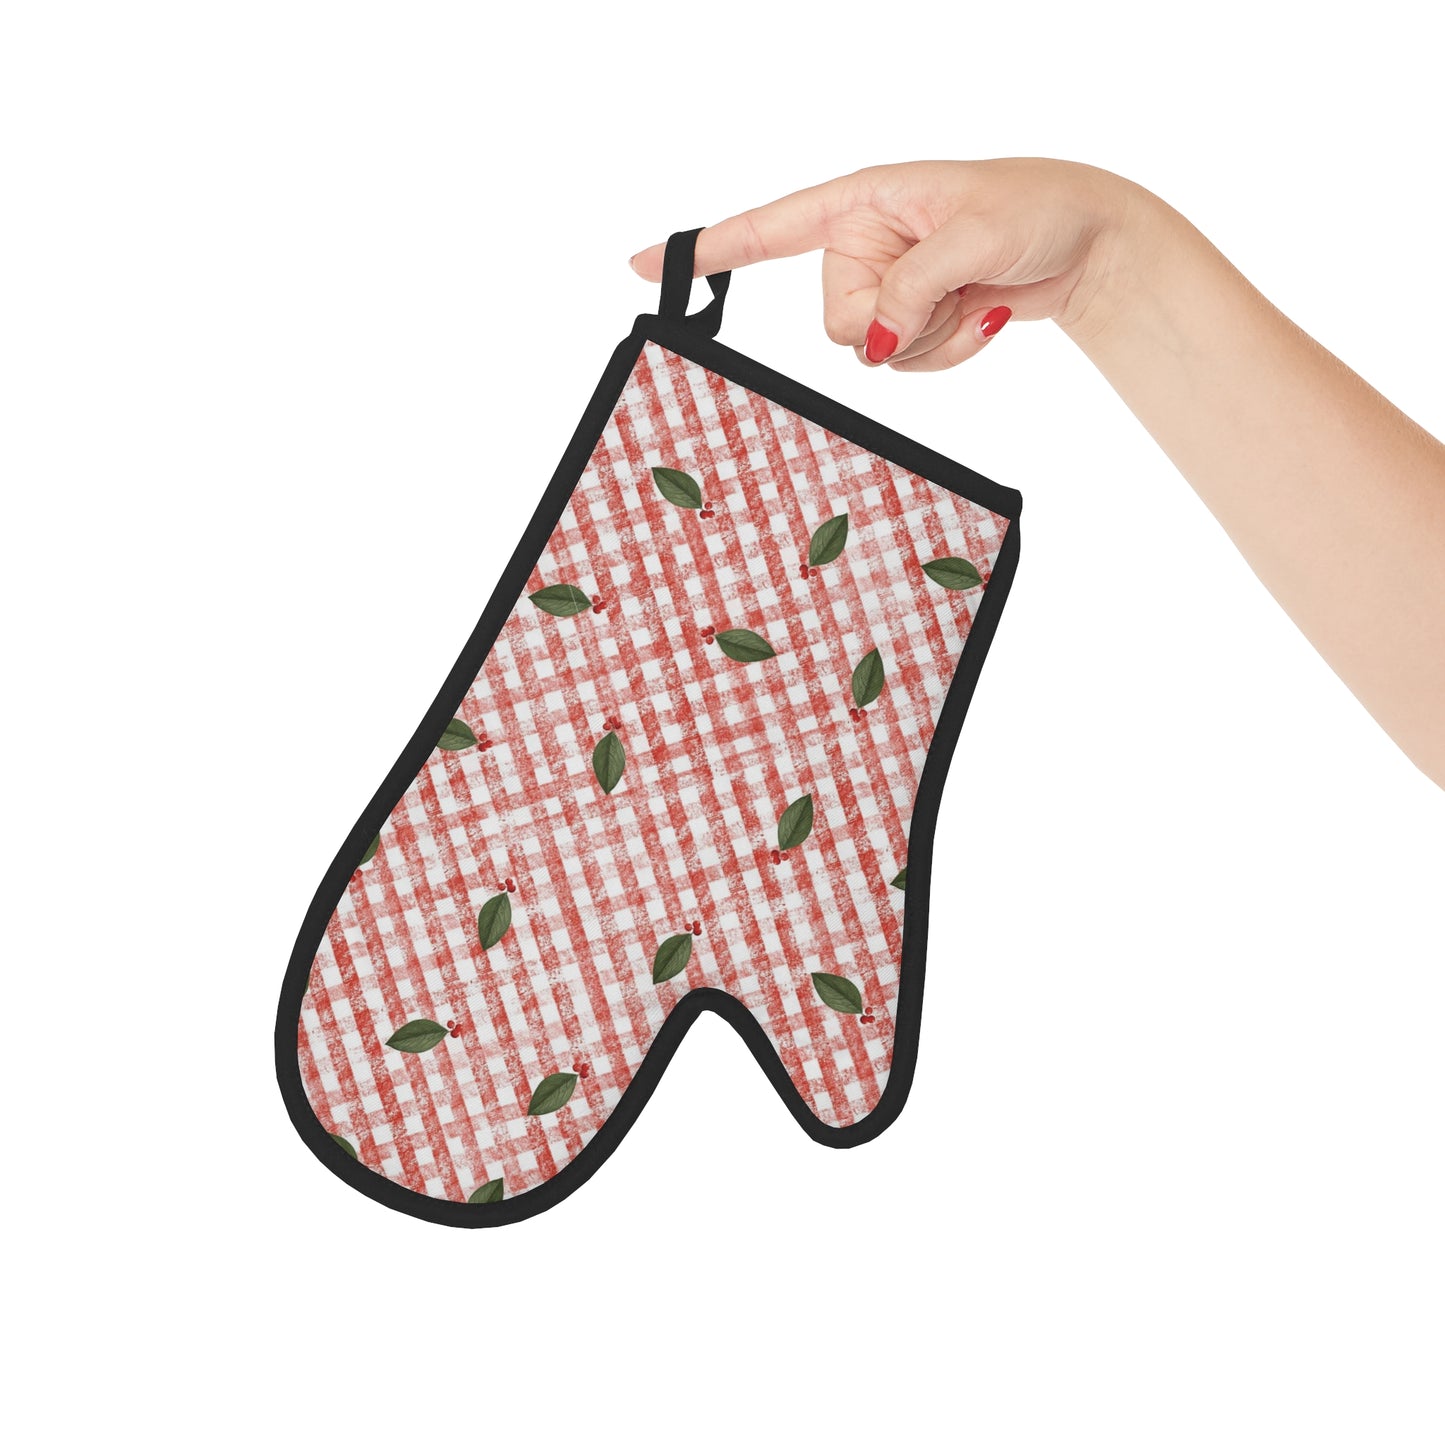 Red & White Gingham Oven Glove